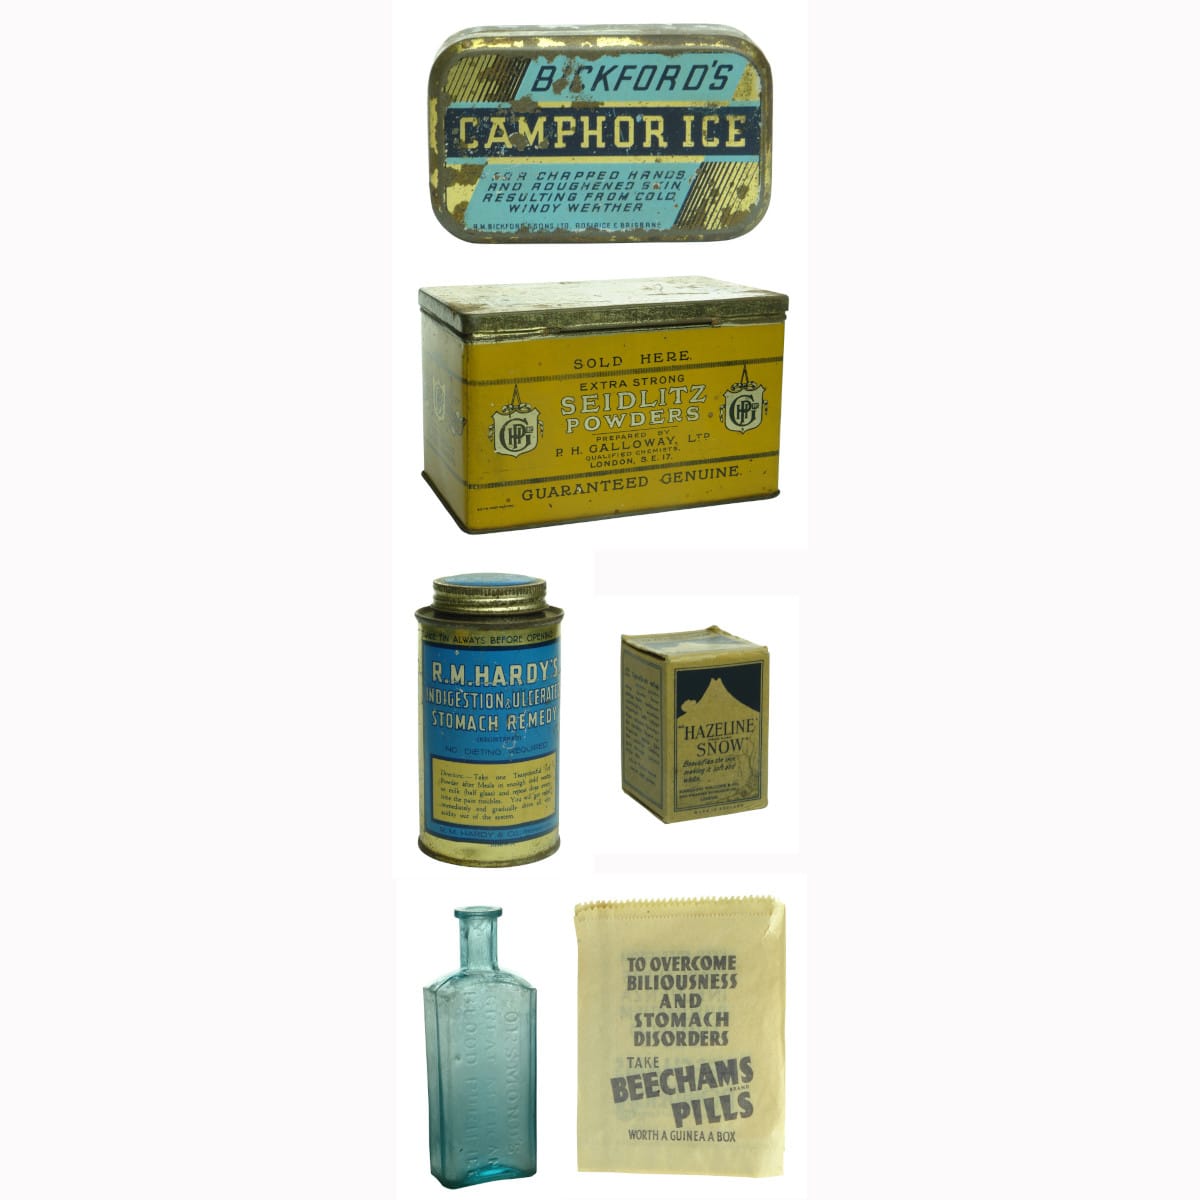 Three Medical Tins, 3 Paper Bags, Blood Purifier bottle and small boxed medical jar : Bickford's Camphor Ice; Bulk Siedlitz Powders; Hardy's Indigestion Remedy; Beechams Pills; Orsmonds Blood Purifier and Hazeltine Snow.